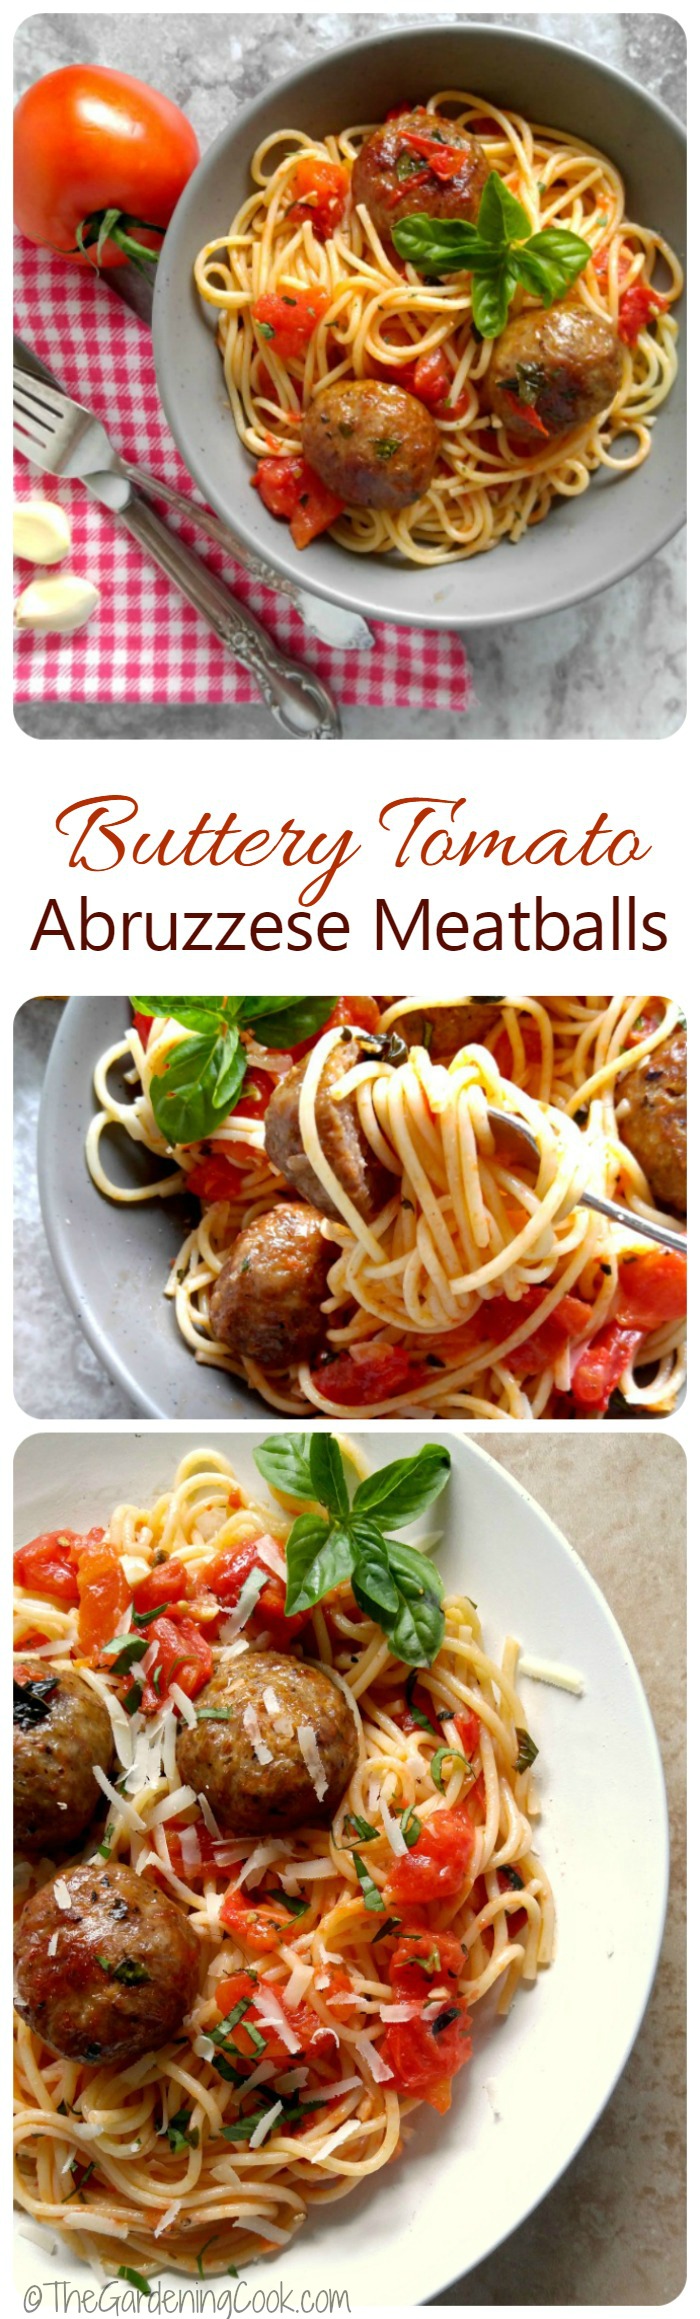 These Abruzzese Italian meatballs in a home made buttery tomato sauce are easy enough for a busy weeknight and also perfect for entertaining. thegardeningcook.com #CarandoMeats #sponsored